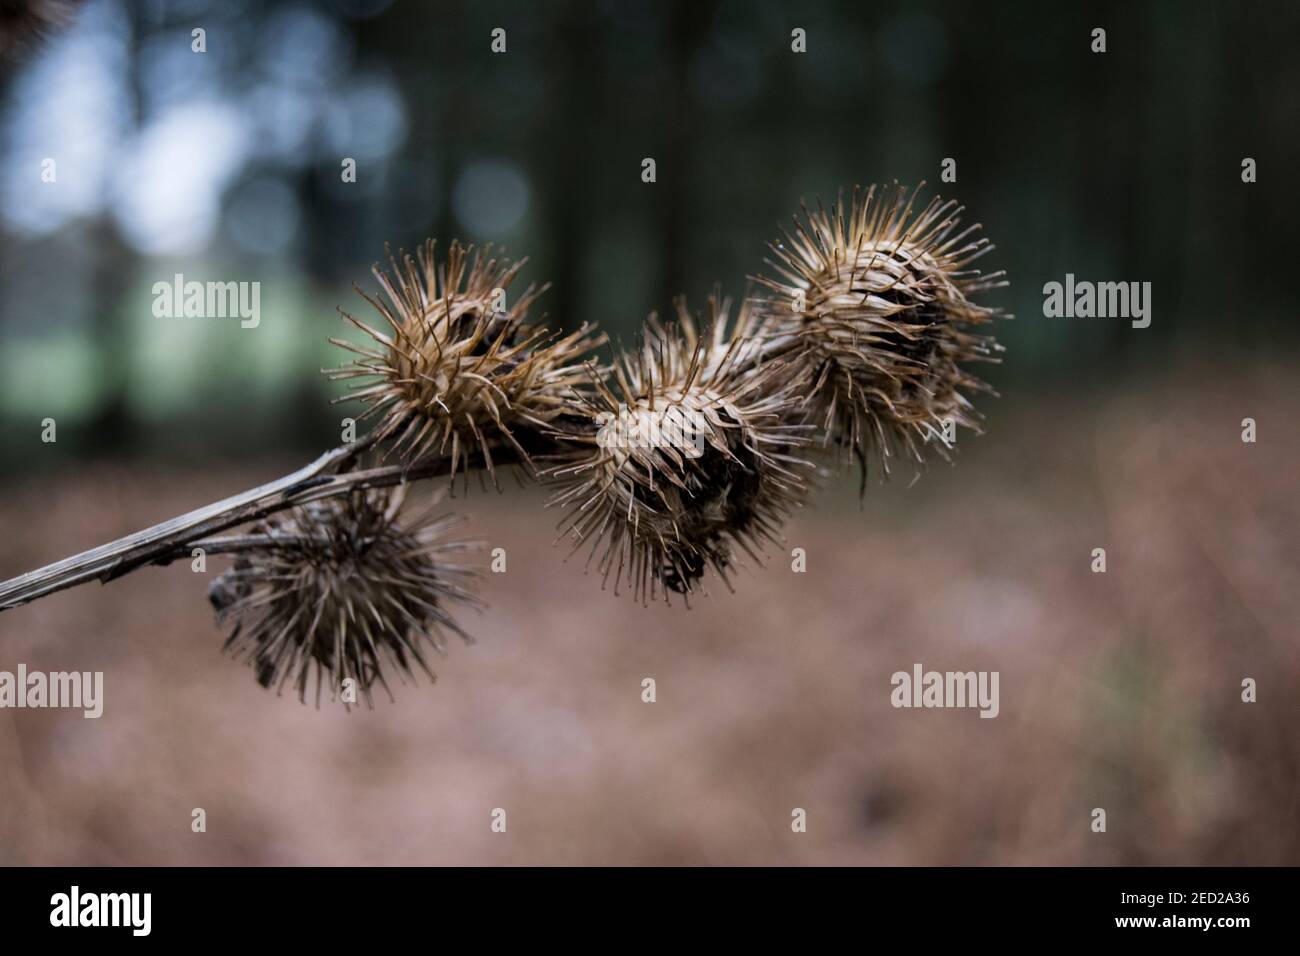 Prickly dried seed heads of Burdock Stock Photo